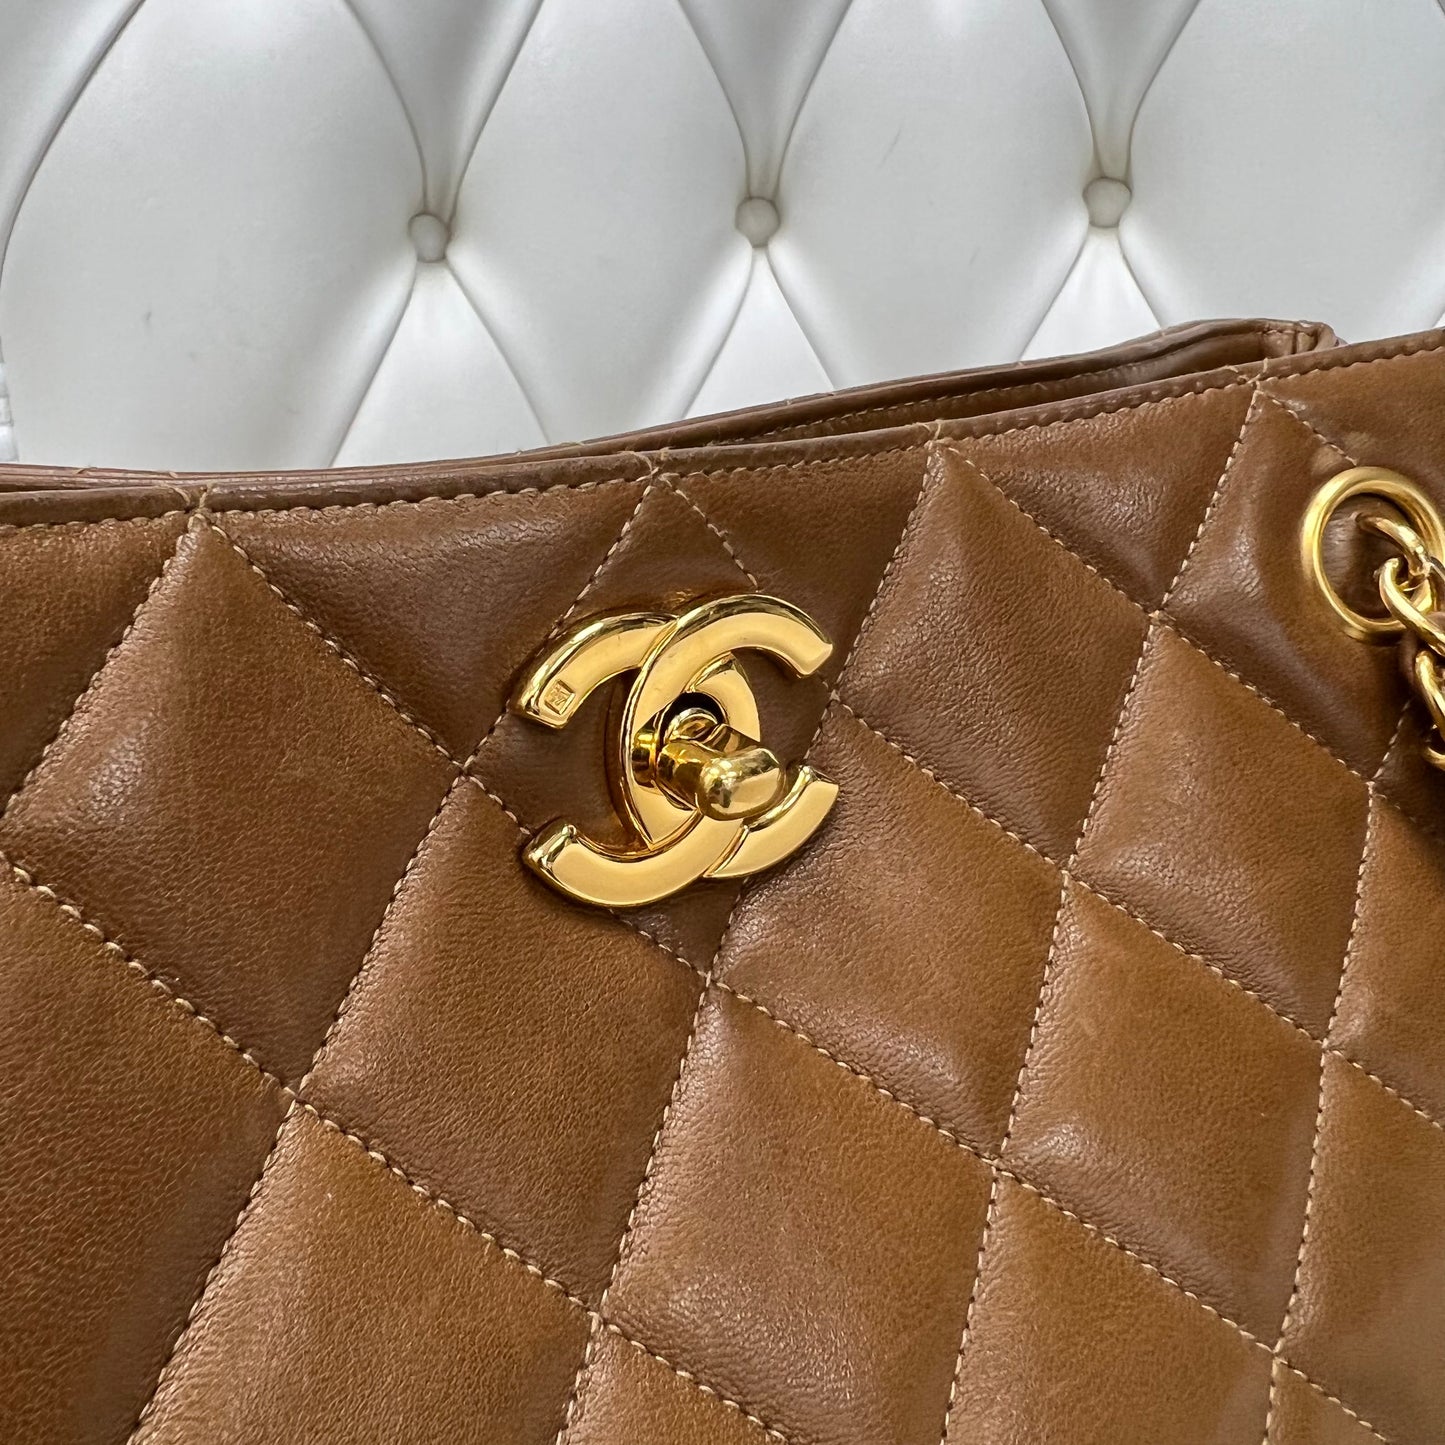 Chanel Vintage CC Chain Shopping Tote